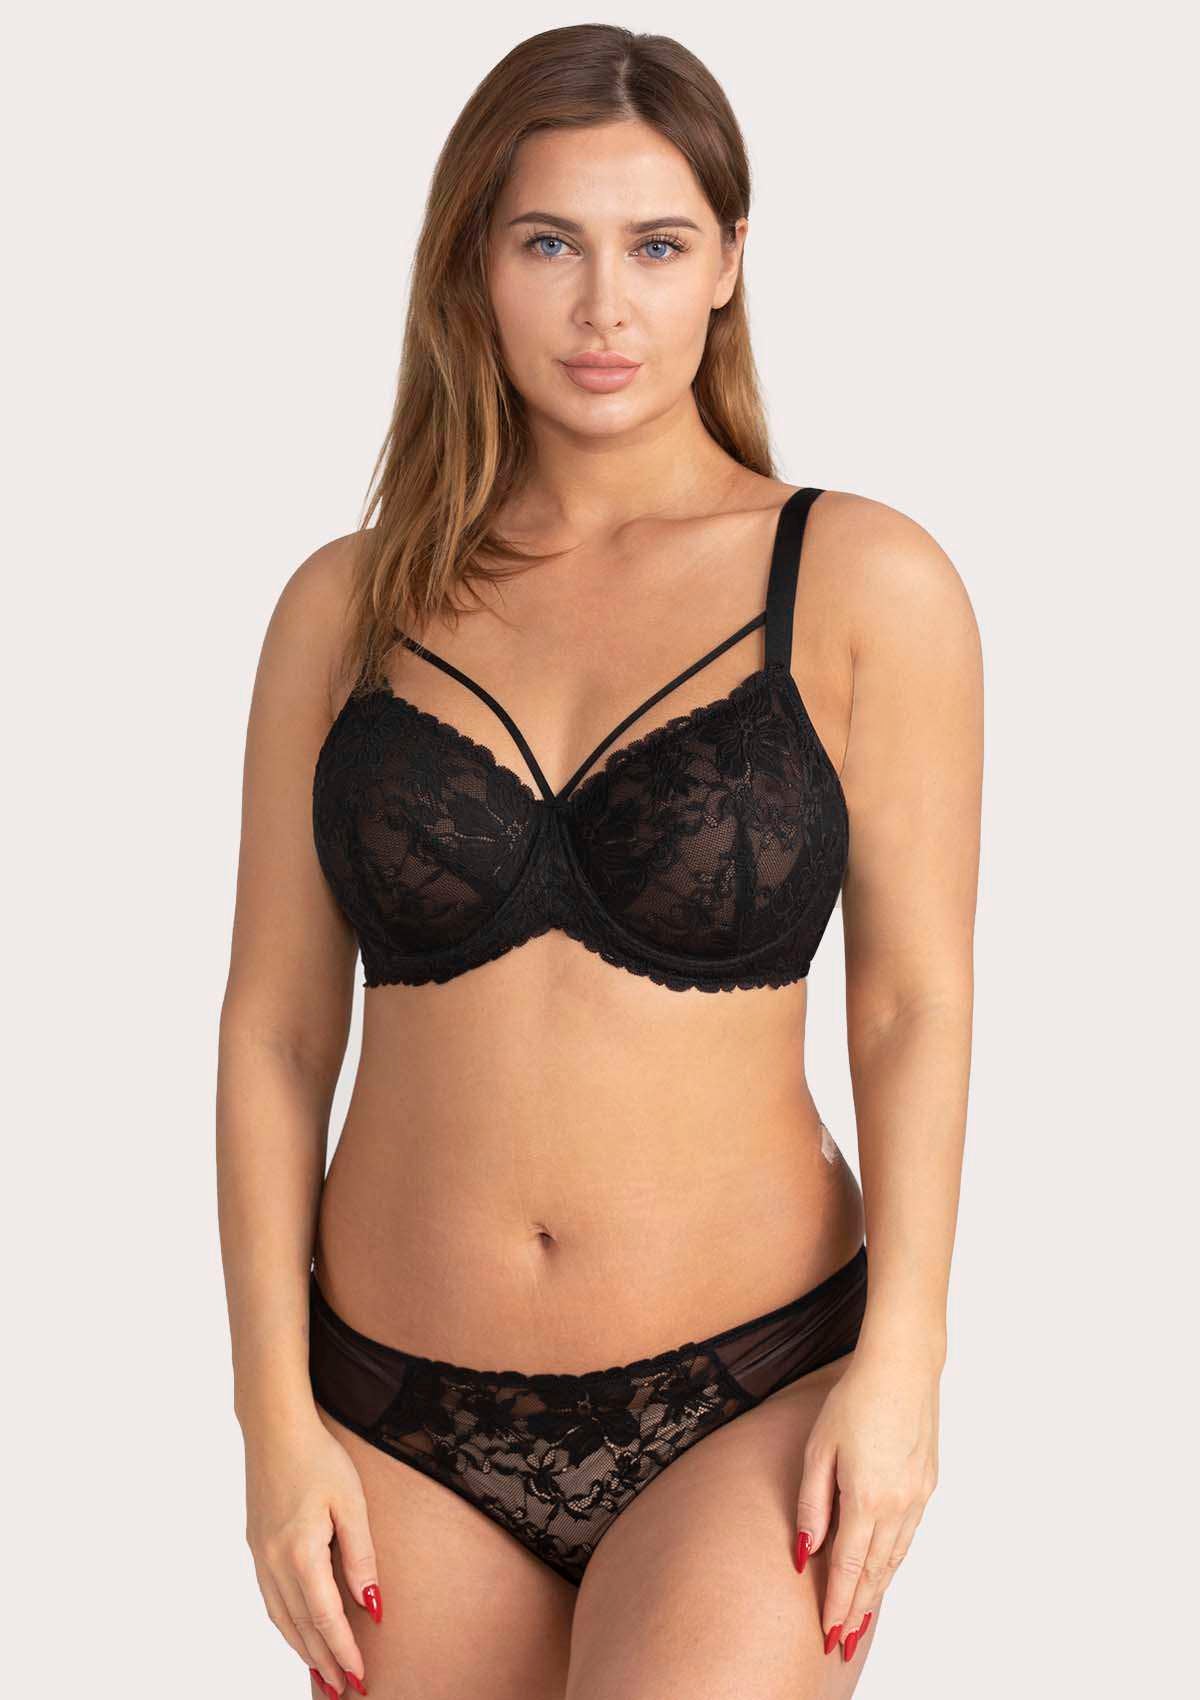 HSIA Pretty In Petals Lace Bra And Panty Set: Non Padded Wired Bra - Black / 36 / C